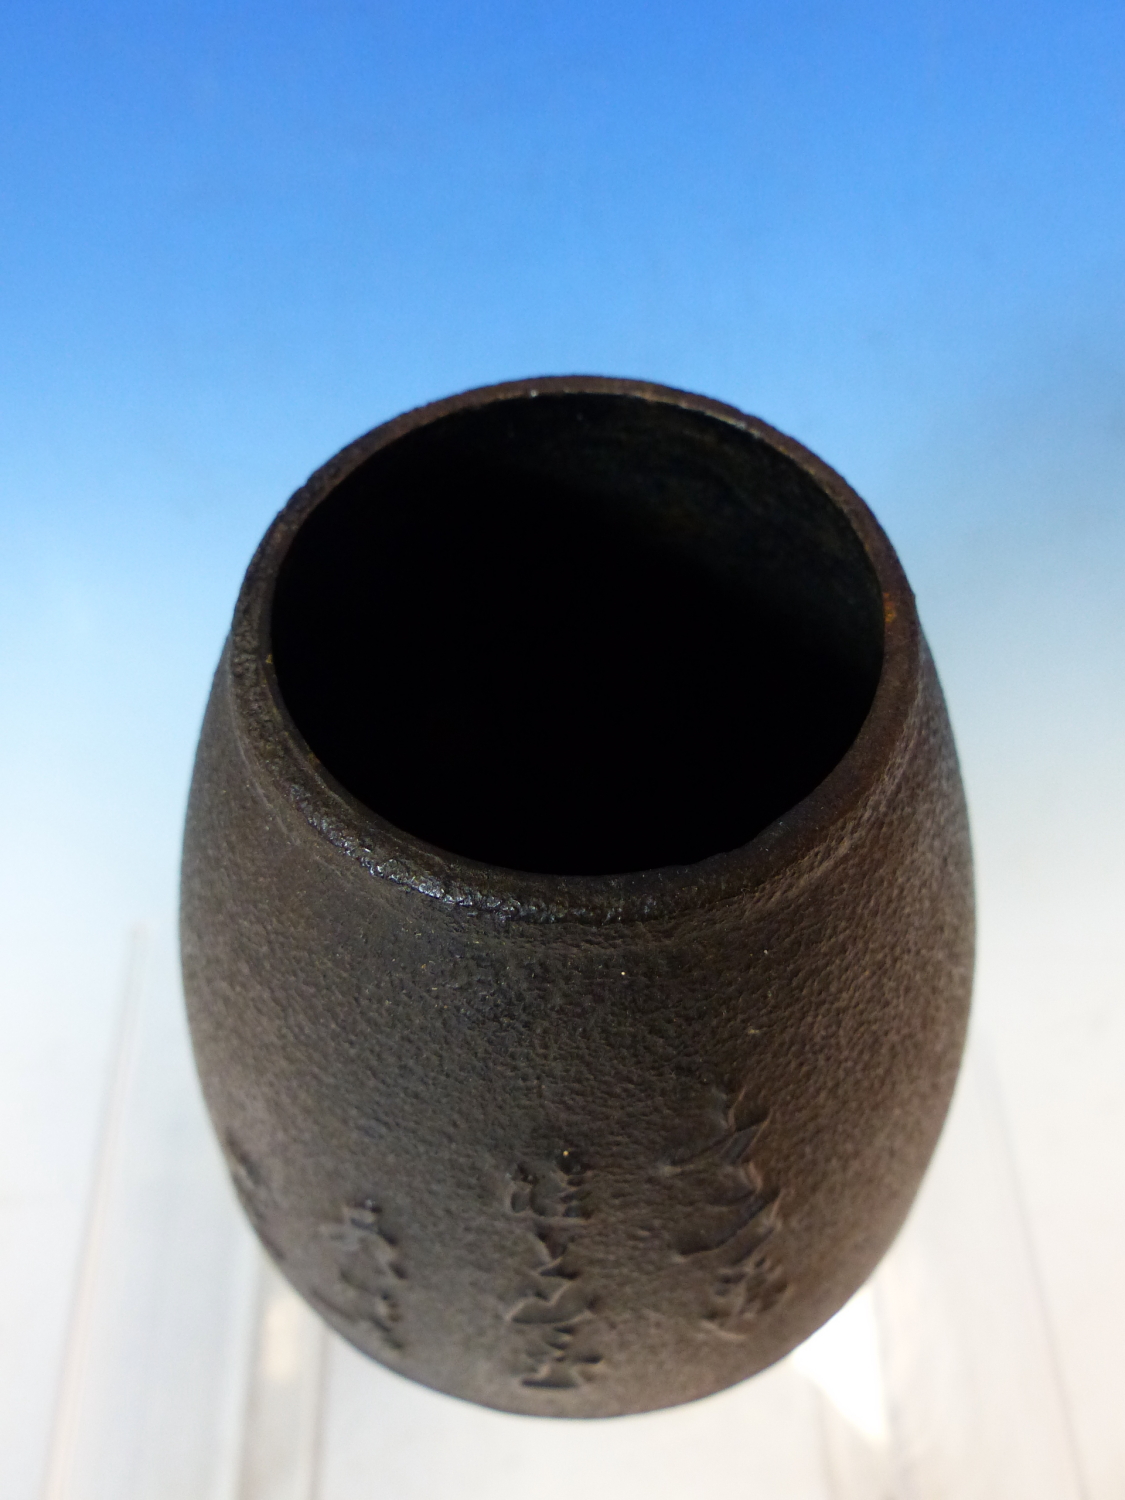 A JAPANESE CAST IRON VASE OF OVOID FORM WITH SCRIPT DECORATION AND SIGNITURE SEAL. 13CM HIGH - Image 3 of 9